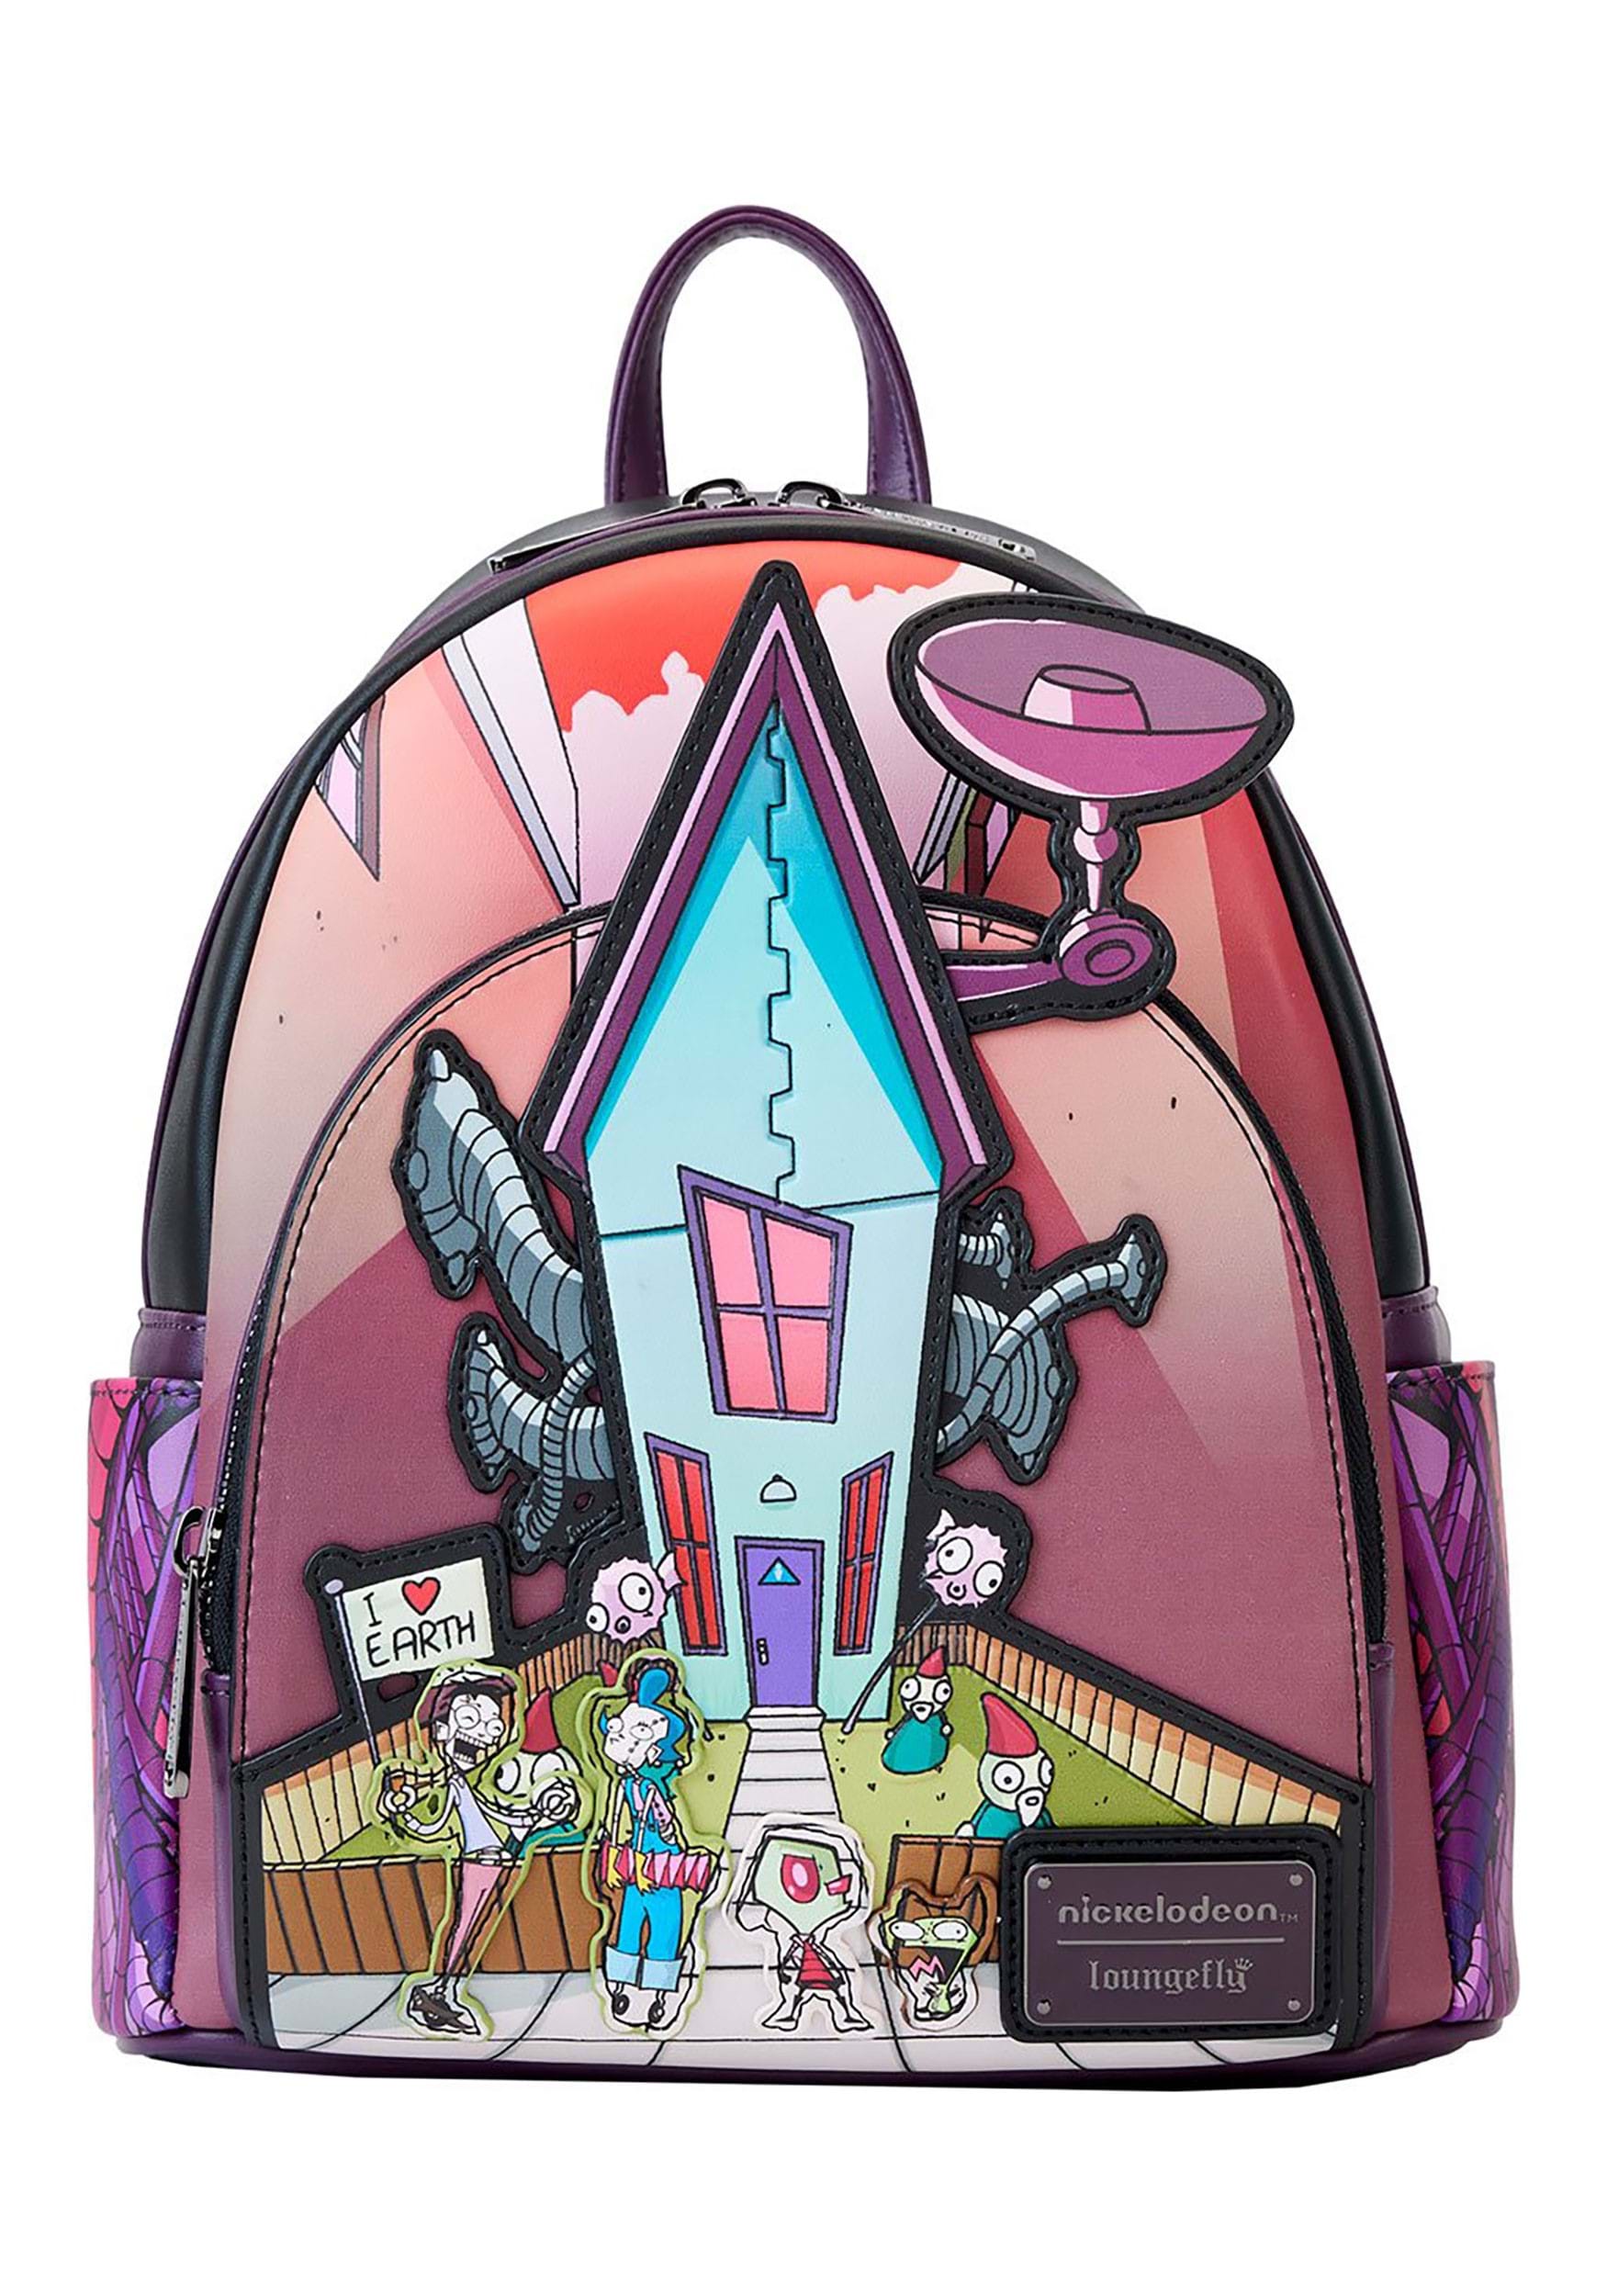 Nickelodeon Invader Zim Secret Lair Mini Backpack by Loungefly